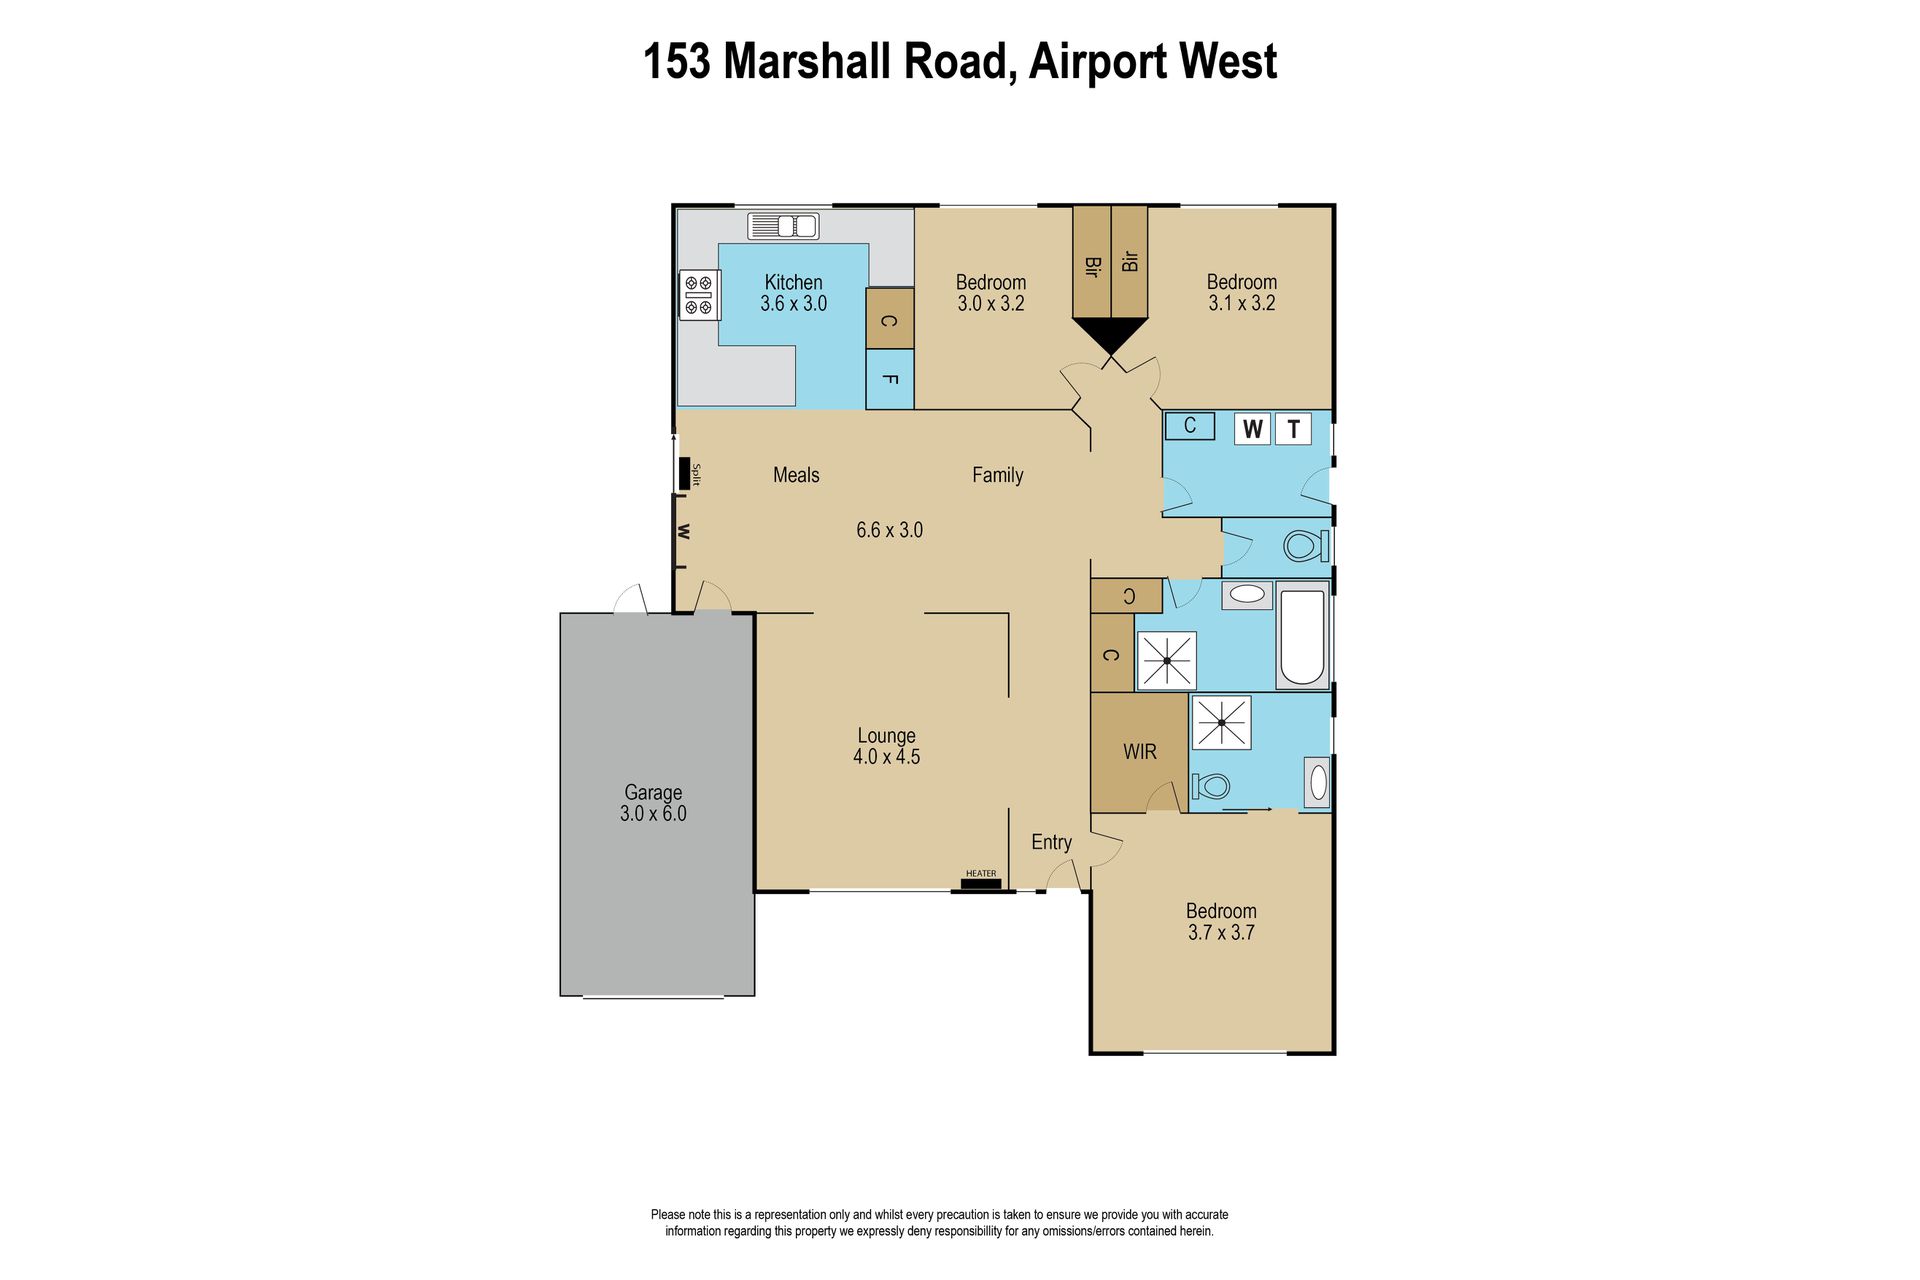 153 Marshall Road, Airport West